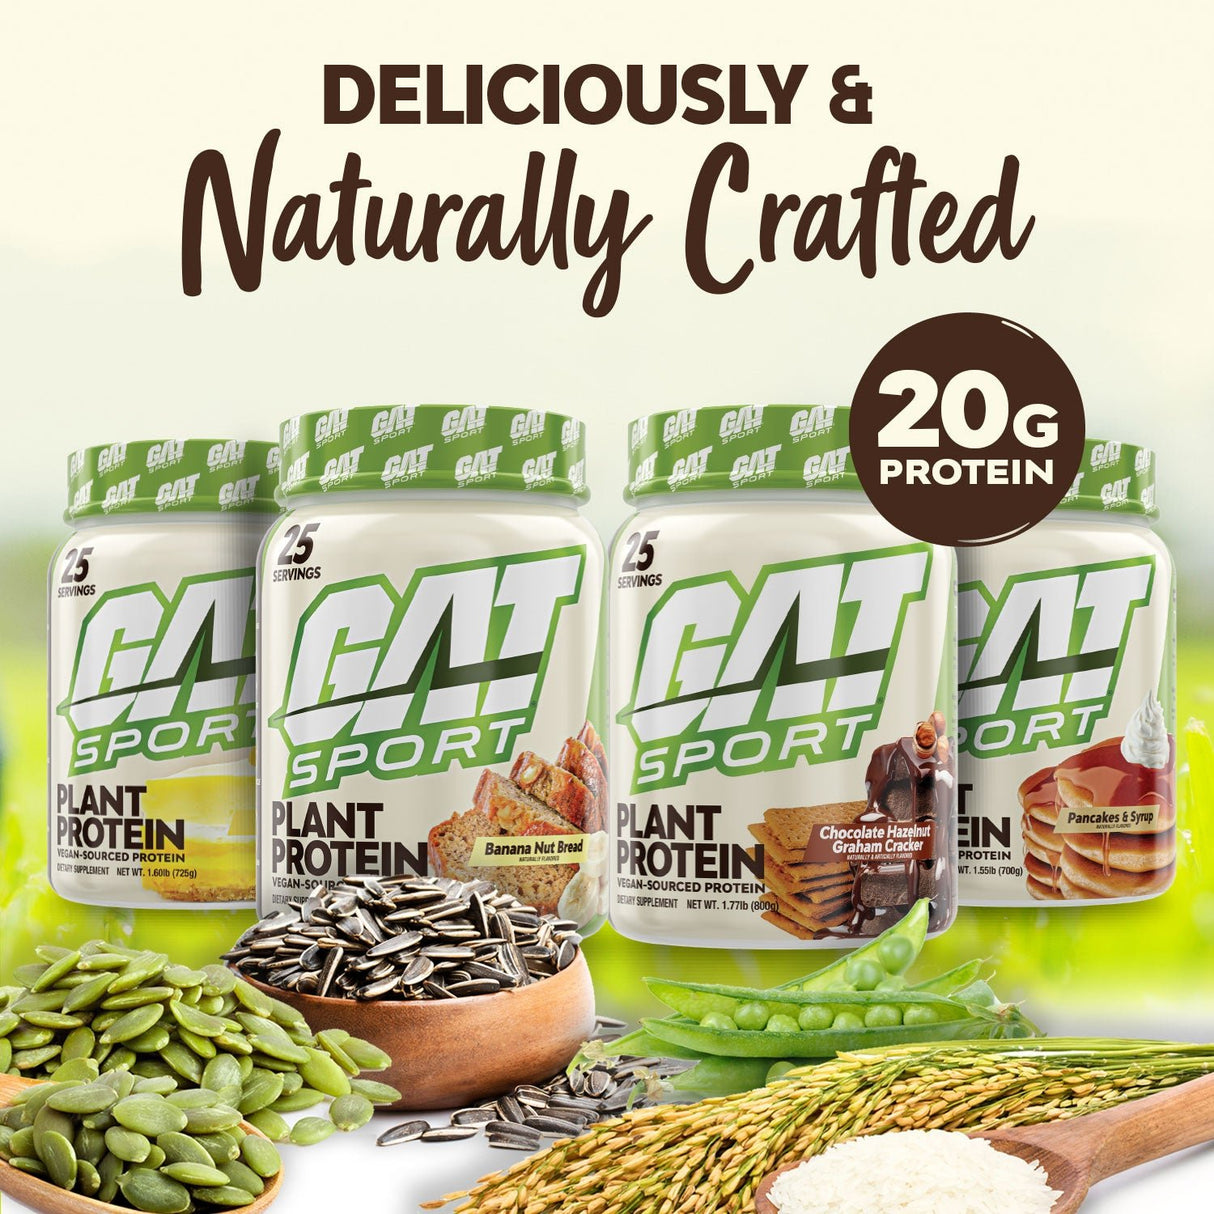 GAT SPORT Plant Protein - naturally crafted